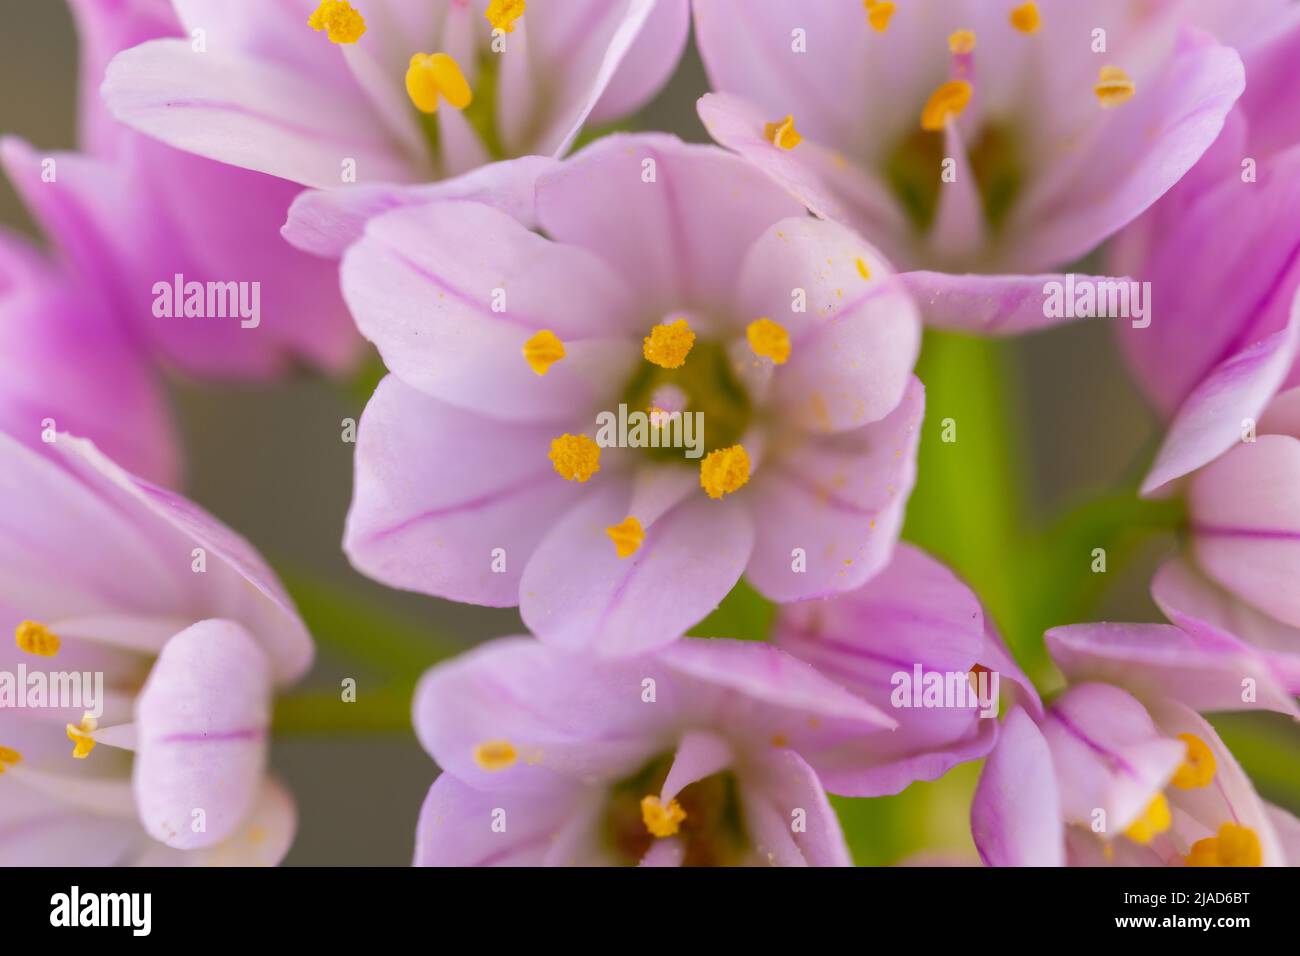 Detail of small wild garlic leek (allium) flowers with soft colors and yellow stamens Stock Photo